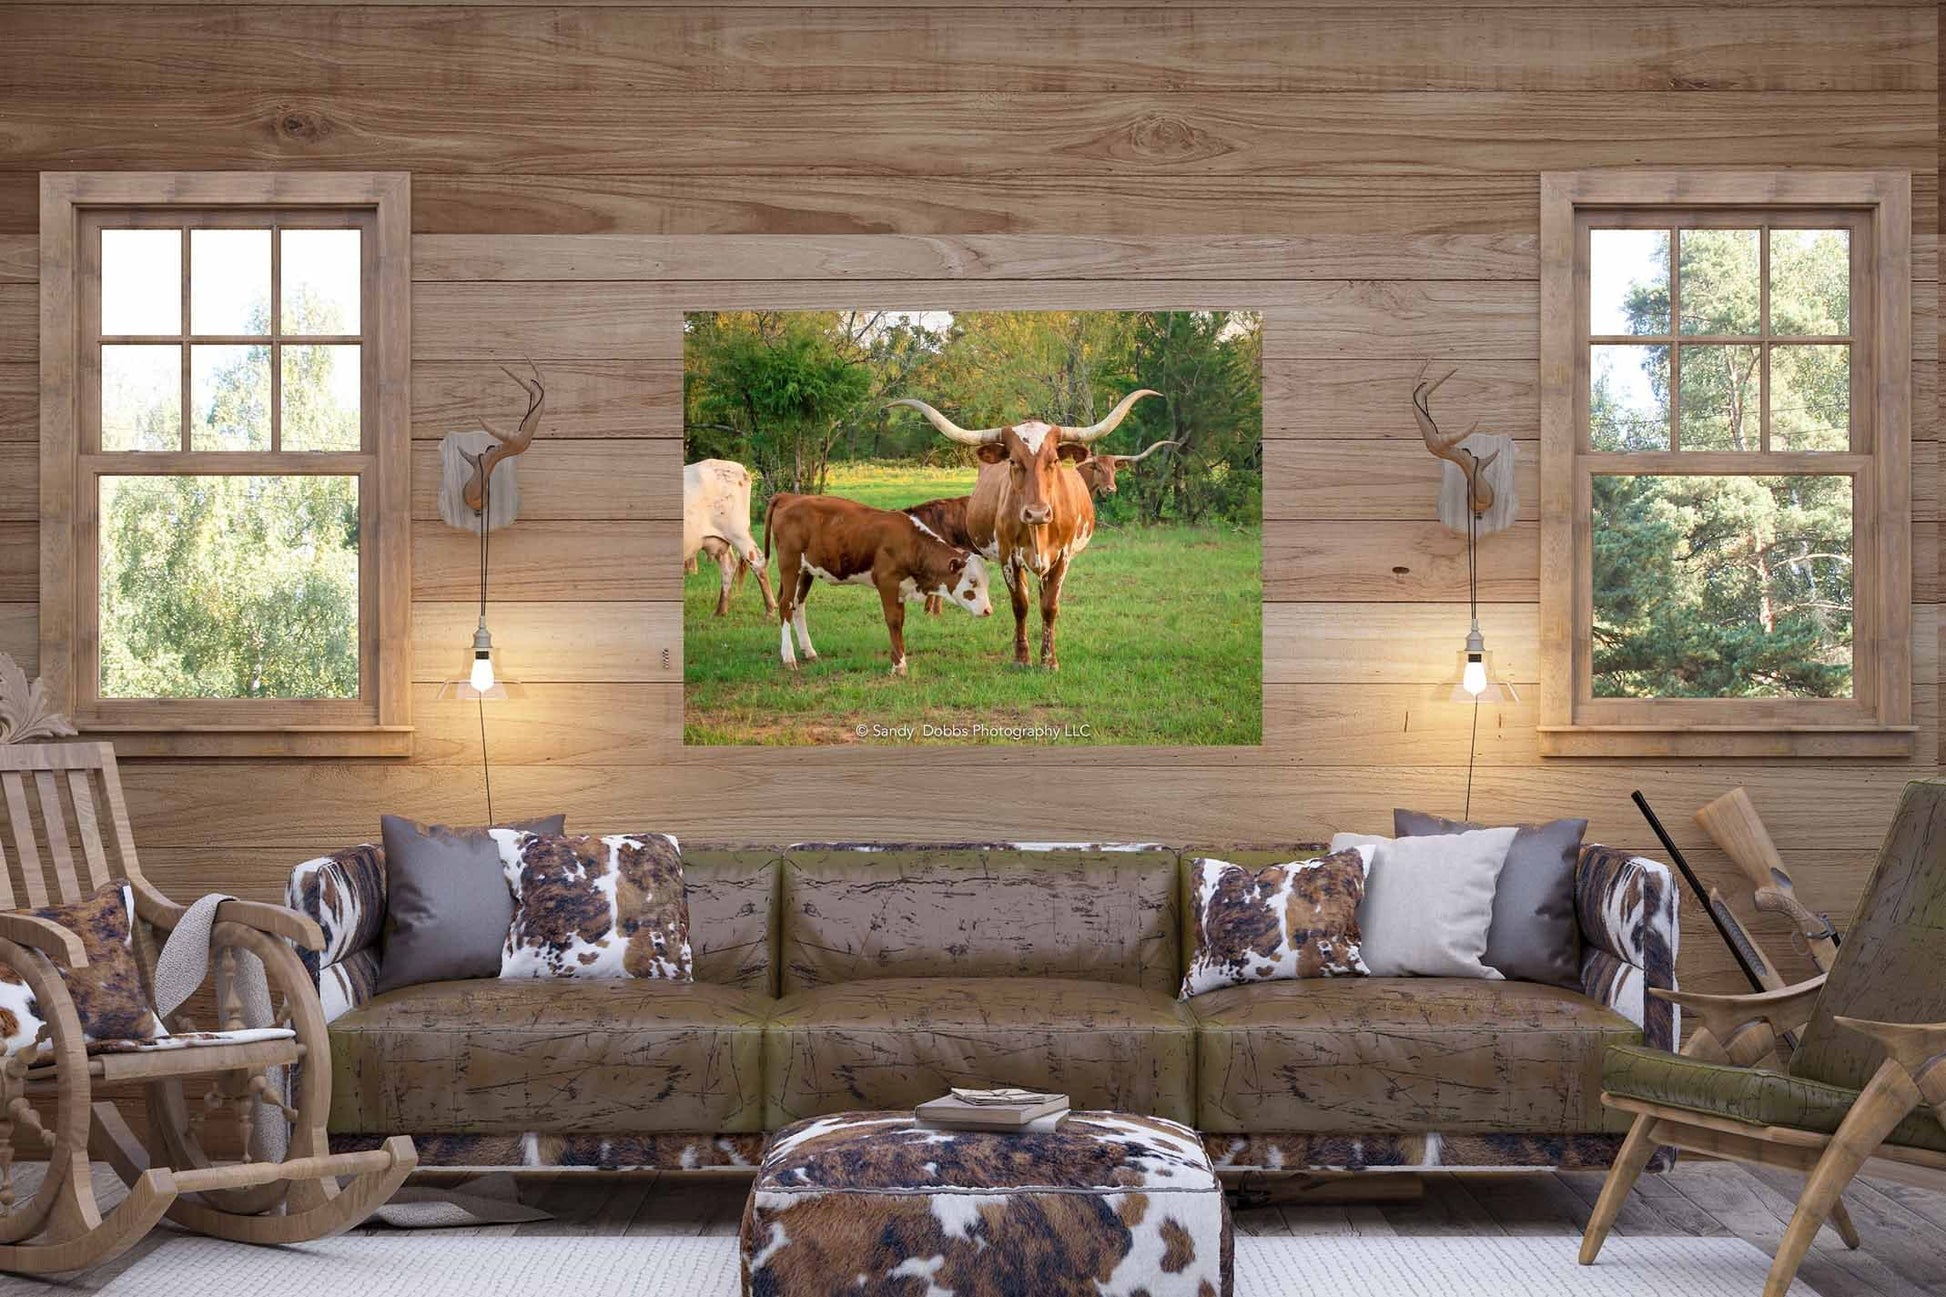 Texas Longhorn Cow Calf Print, Canvas Wall Art Prints, Cow Wall Art, Western Decor, Rustic Wall Decor for Home and Office